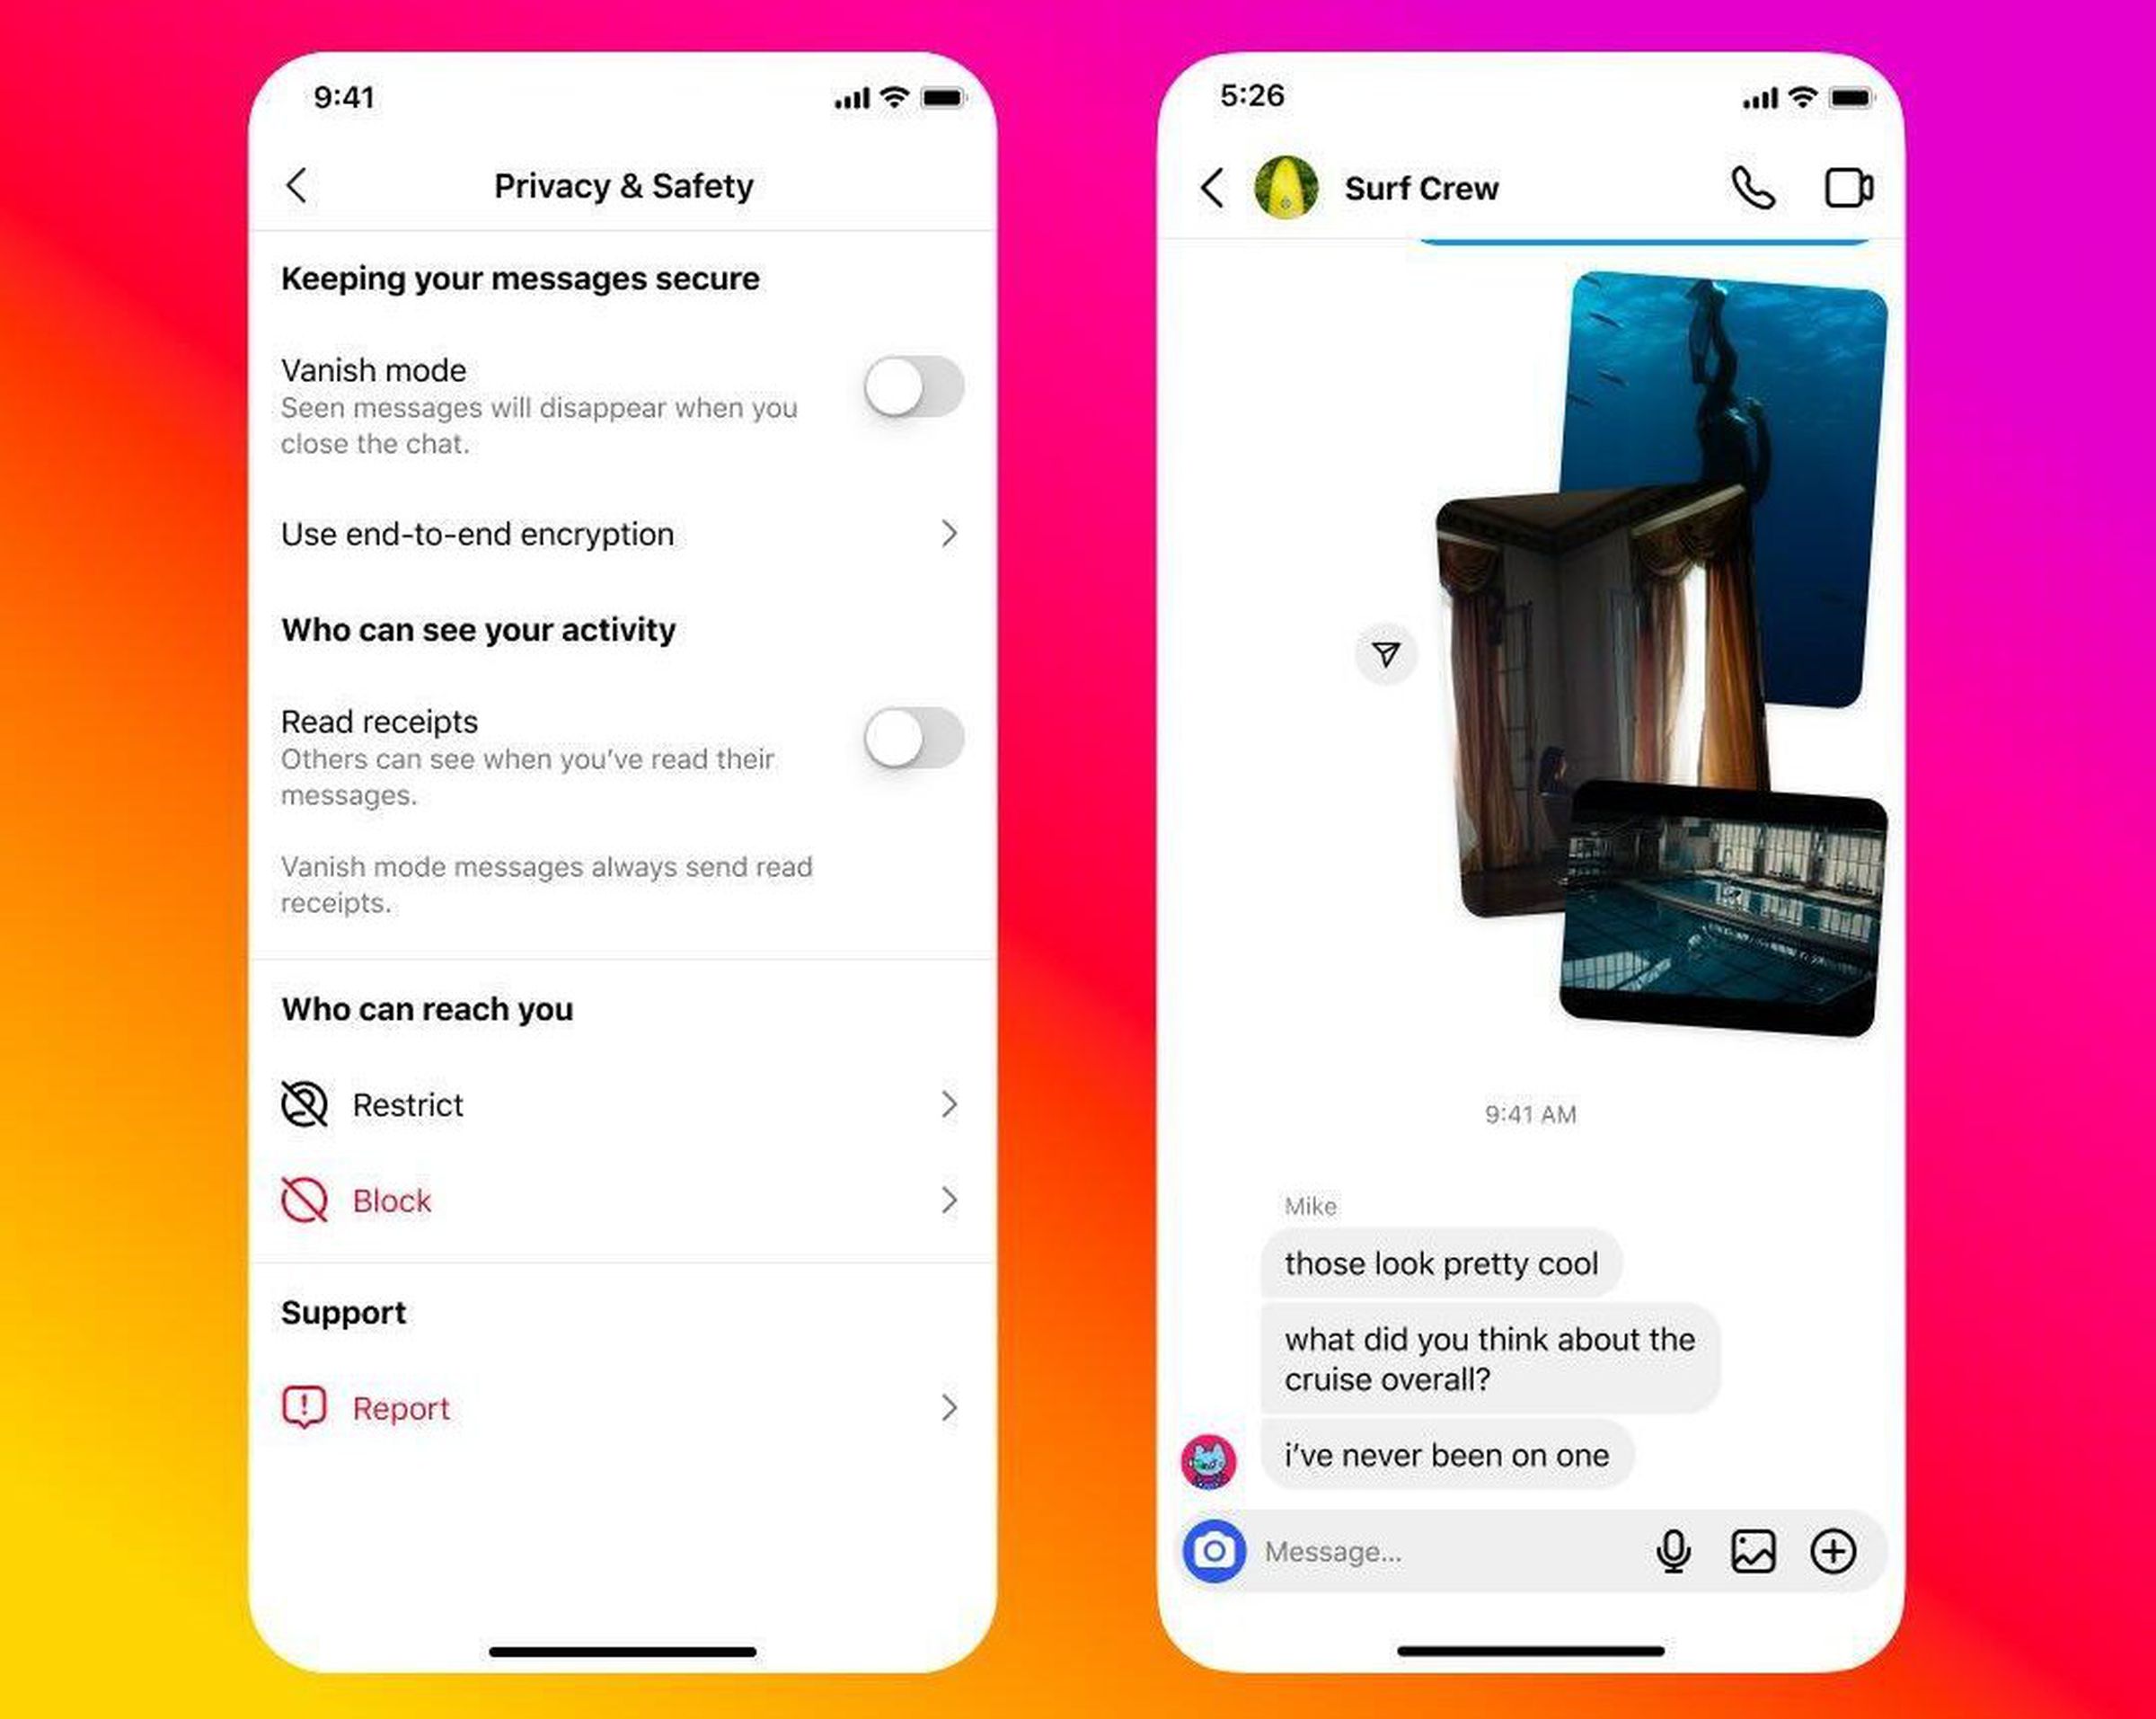 Two screenshots of the Instagram app side by side, one showing pricay and settings area with a toggle to turn read receipts for direct messages on or off, and another screenhot showing an Instagram direct message conversation without read receipt indicators.